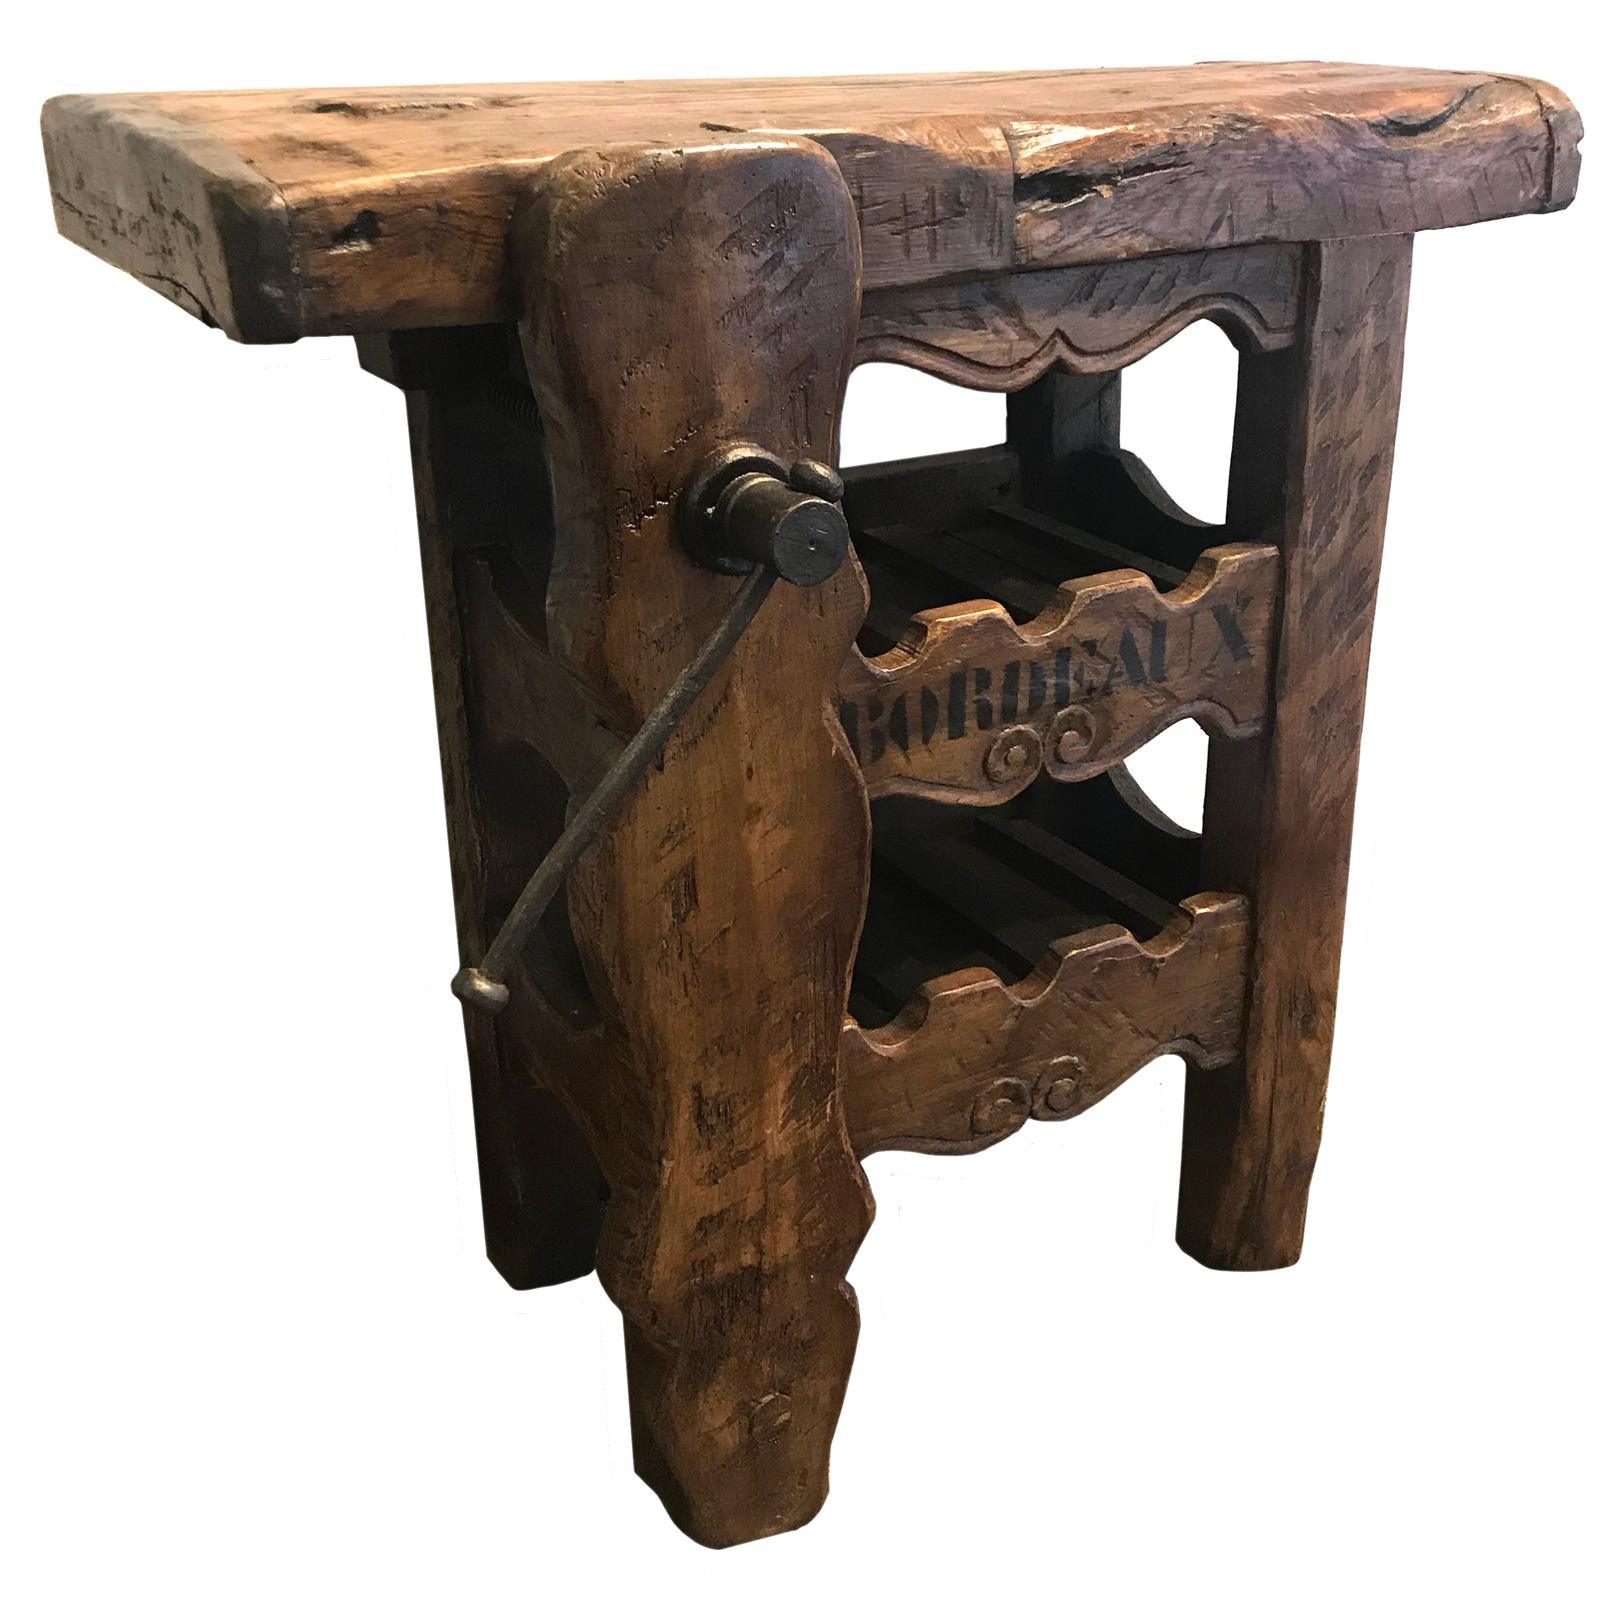 Made from 19th century French walnut, each bench dates to the 1870s in Lyon. Each bench bears the marks of generations of use. A small furniture maker in Lyon has recently acquired a limited number of these traditional benches, side-tables, and